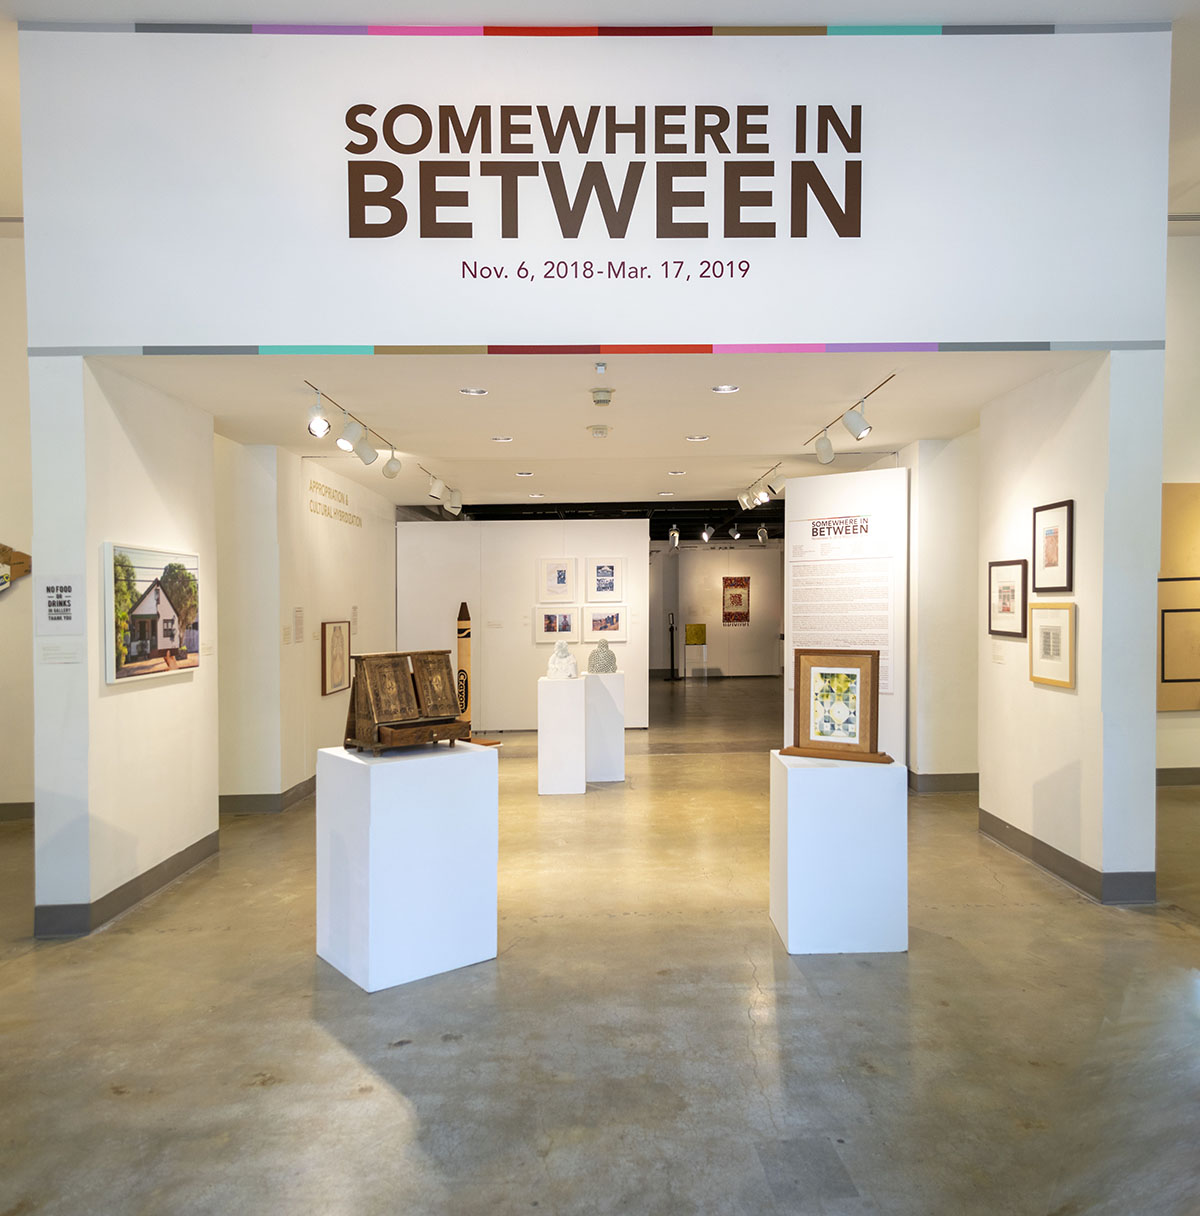 Title Wall entrance view of the gallery, Exhibition: Somewhere In Between, Nov 6, 2018 - Mar 17, 2019, Co-curated by Michele Cairella Fillmore & Bia Gayotto, W. Keith & Janet Kellogg Art Gallery, Cal Poly Pomona.